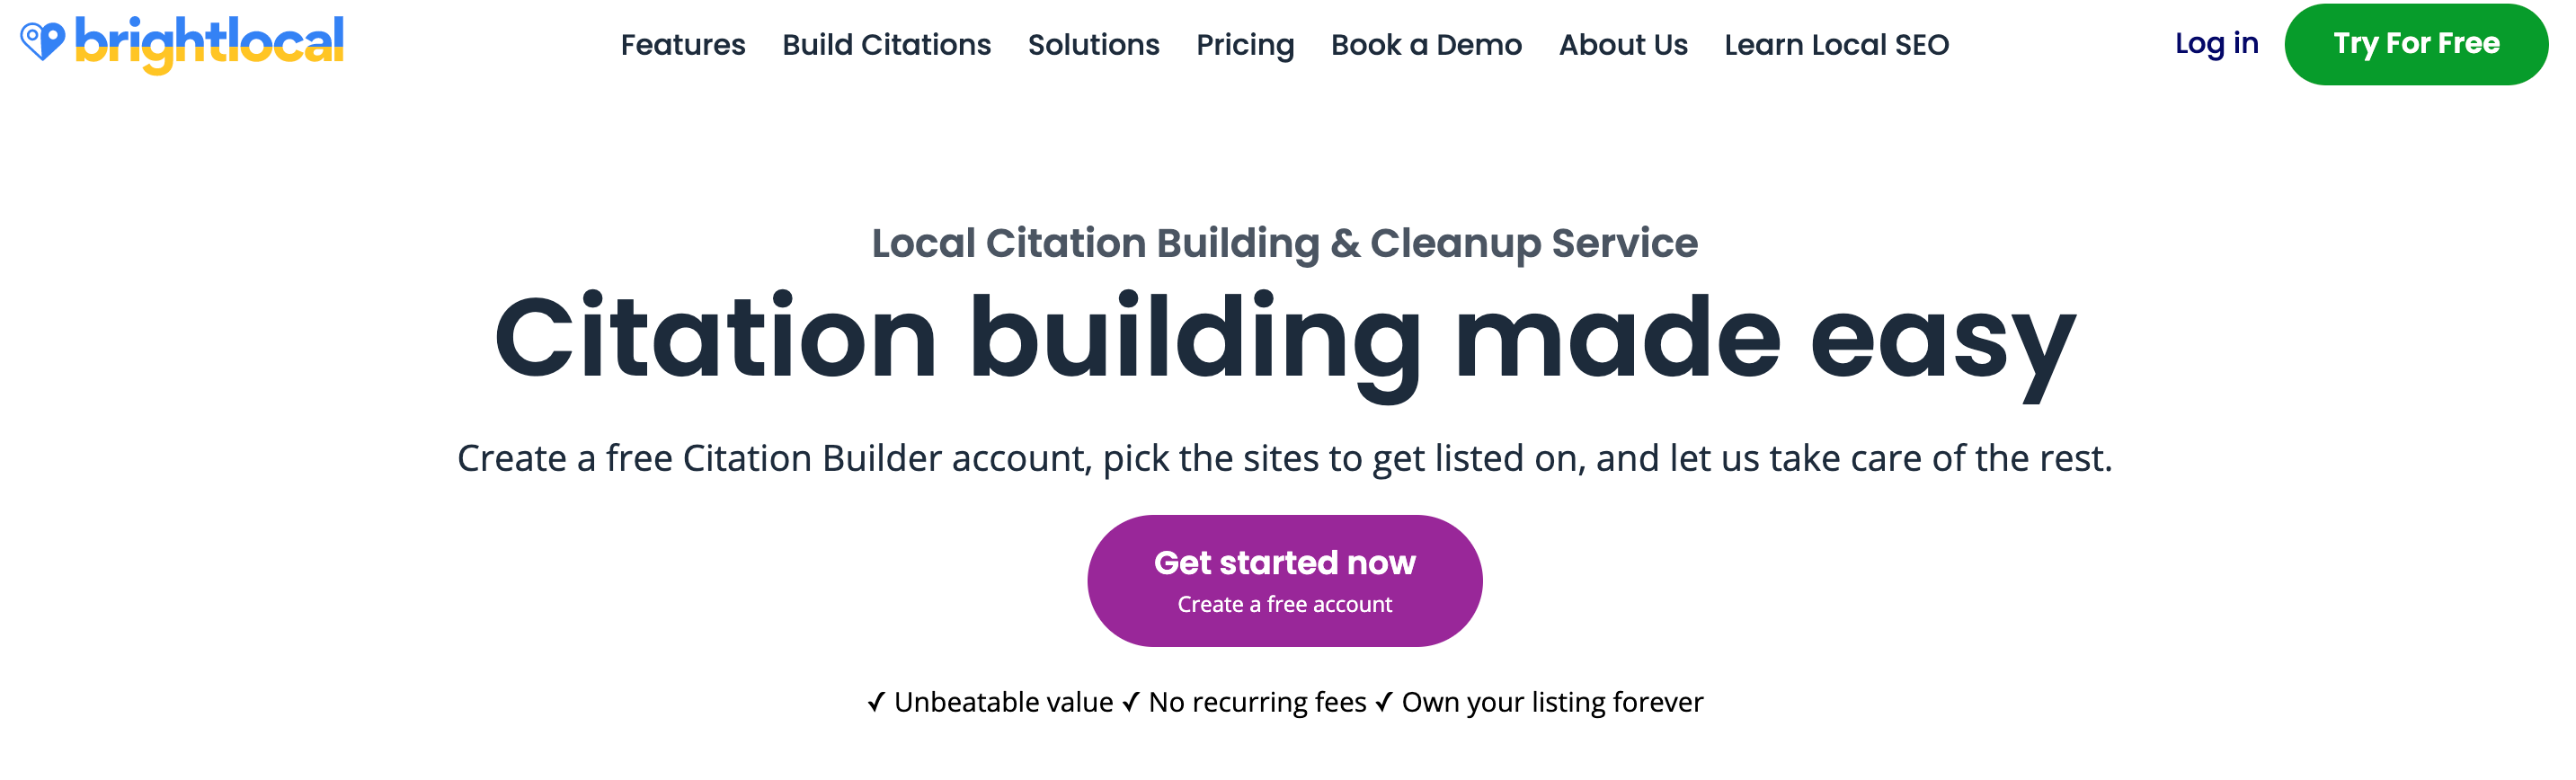 Local-Citation-Building-Service-Citation-Builder-by-BrightLocal - Agency Jet